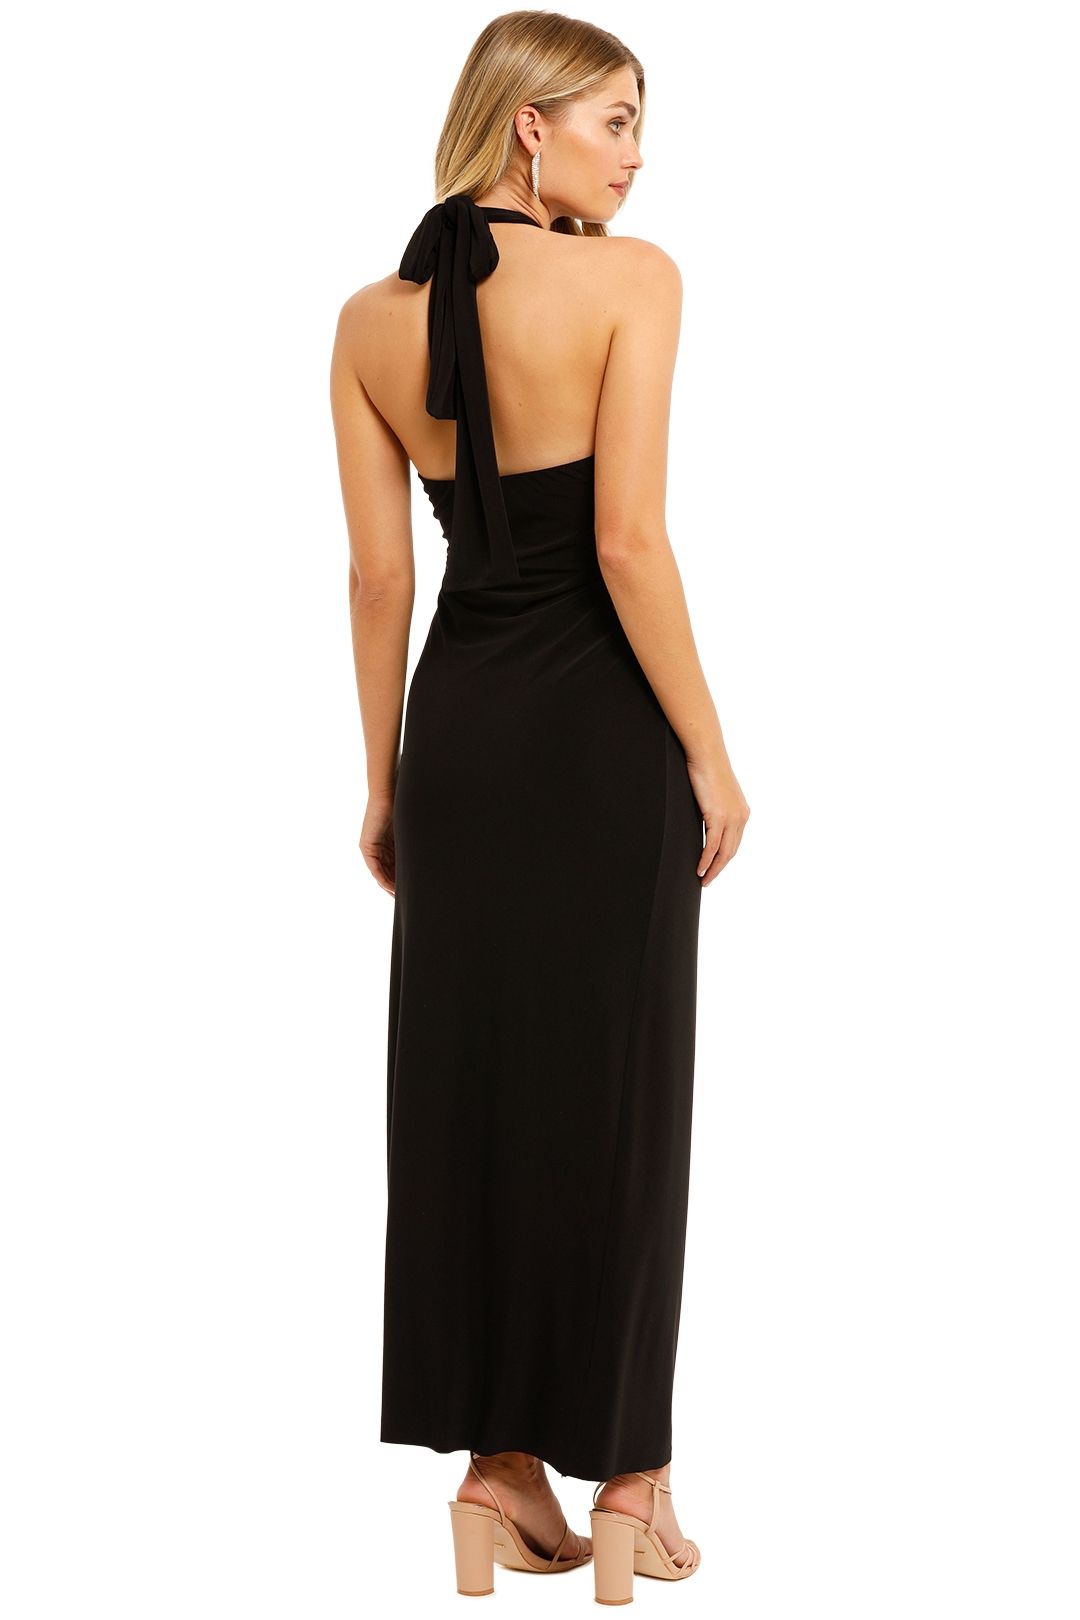 By Johnny Slip Knot Gown Black